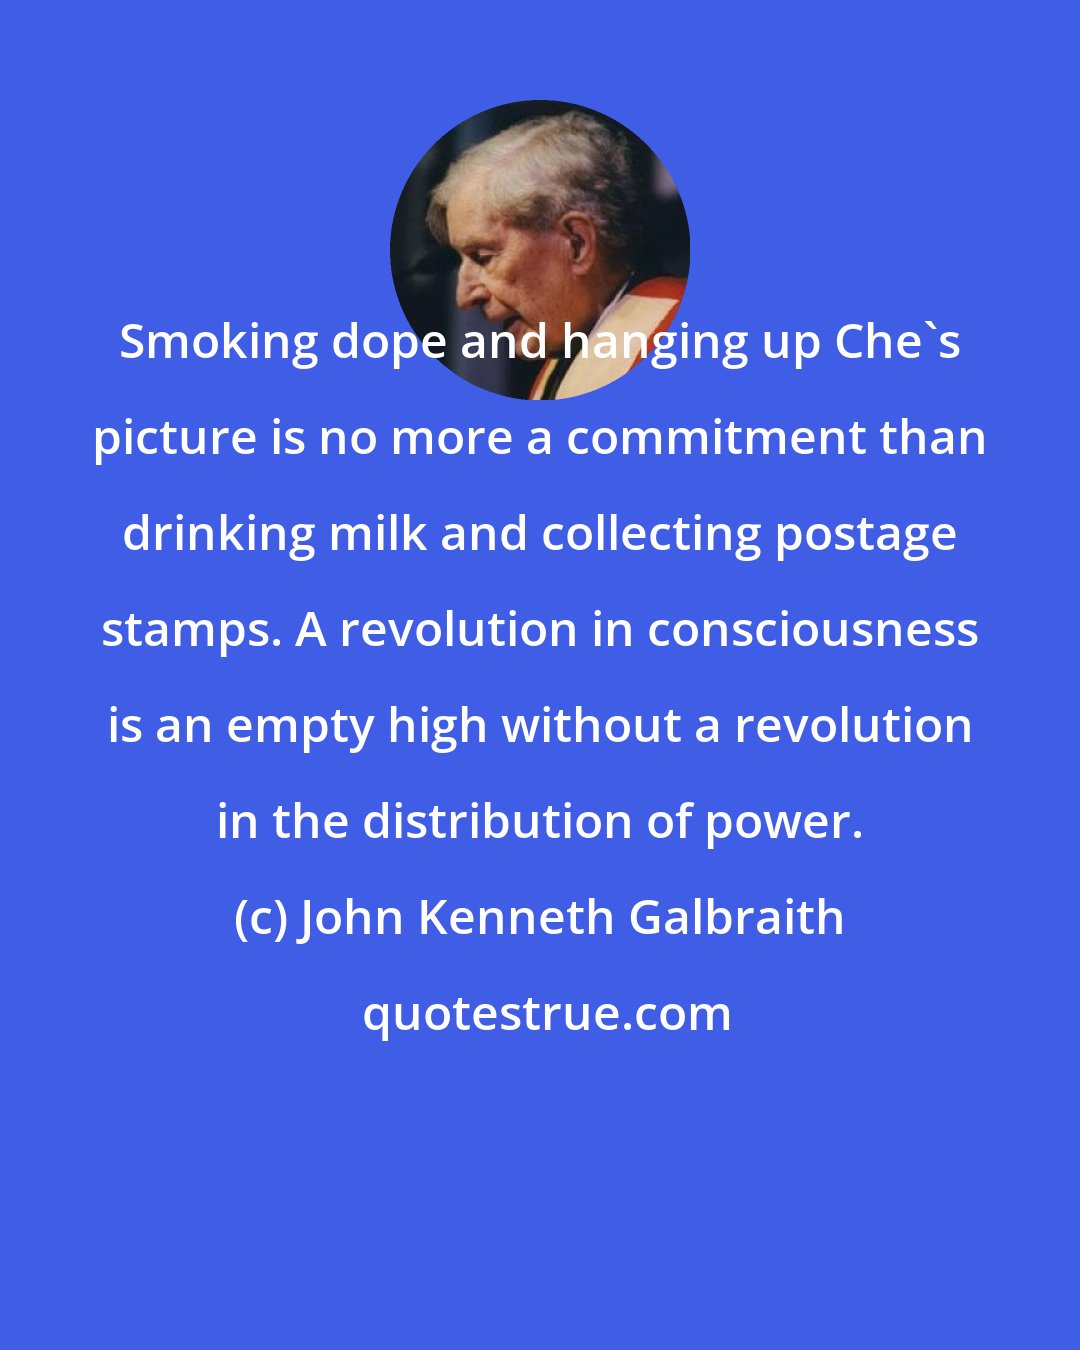 John Kenneth Galbraith: Smoking dope and hanging up Che's picture is no more a commitment than drinking milk and collecting postage stamps. A revolution in consciousness is an empty high without a revolution in the distribution of power.